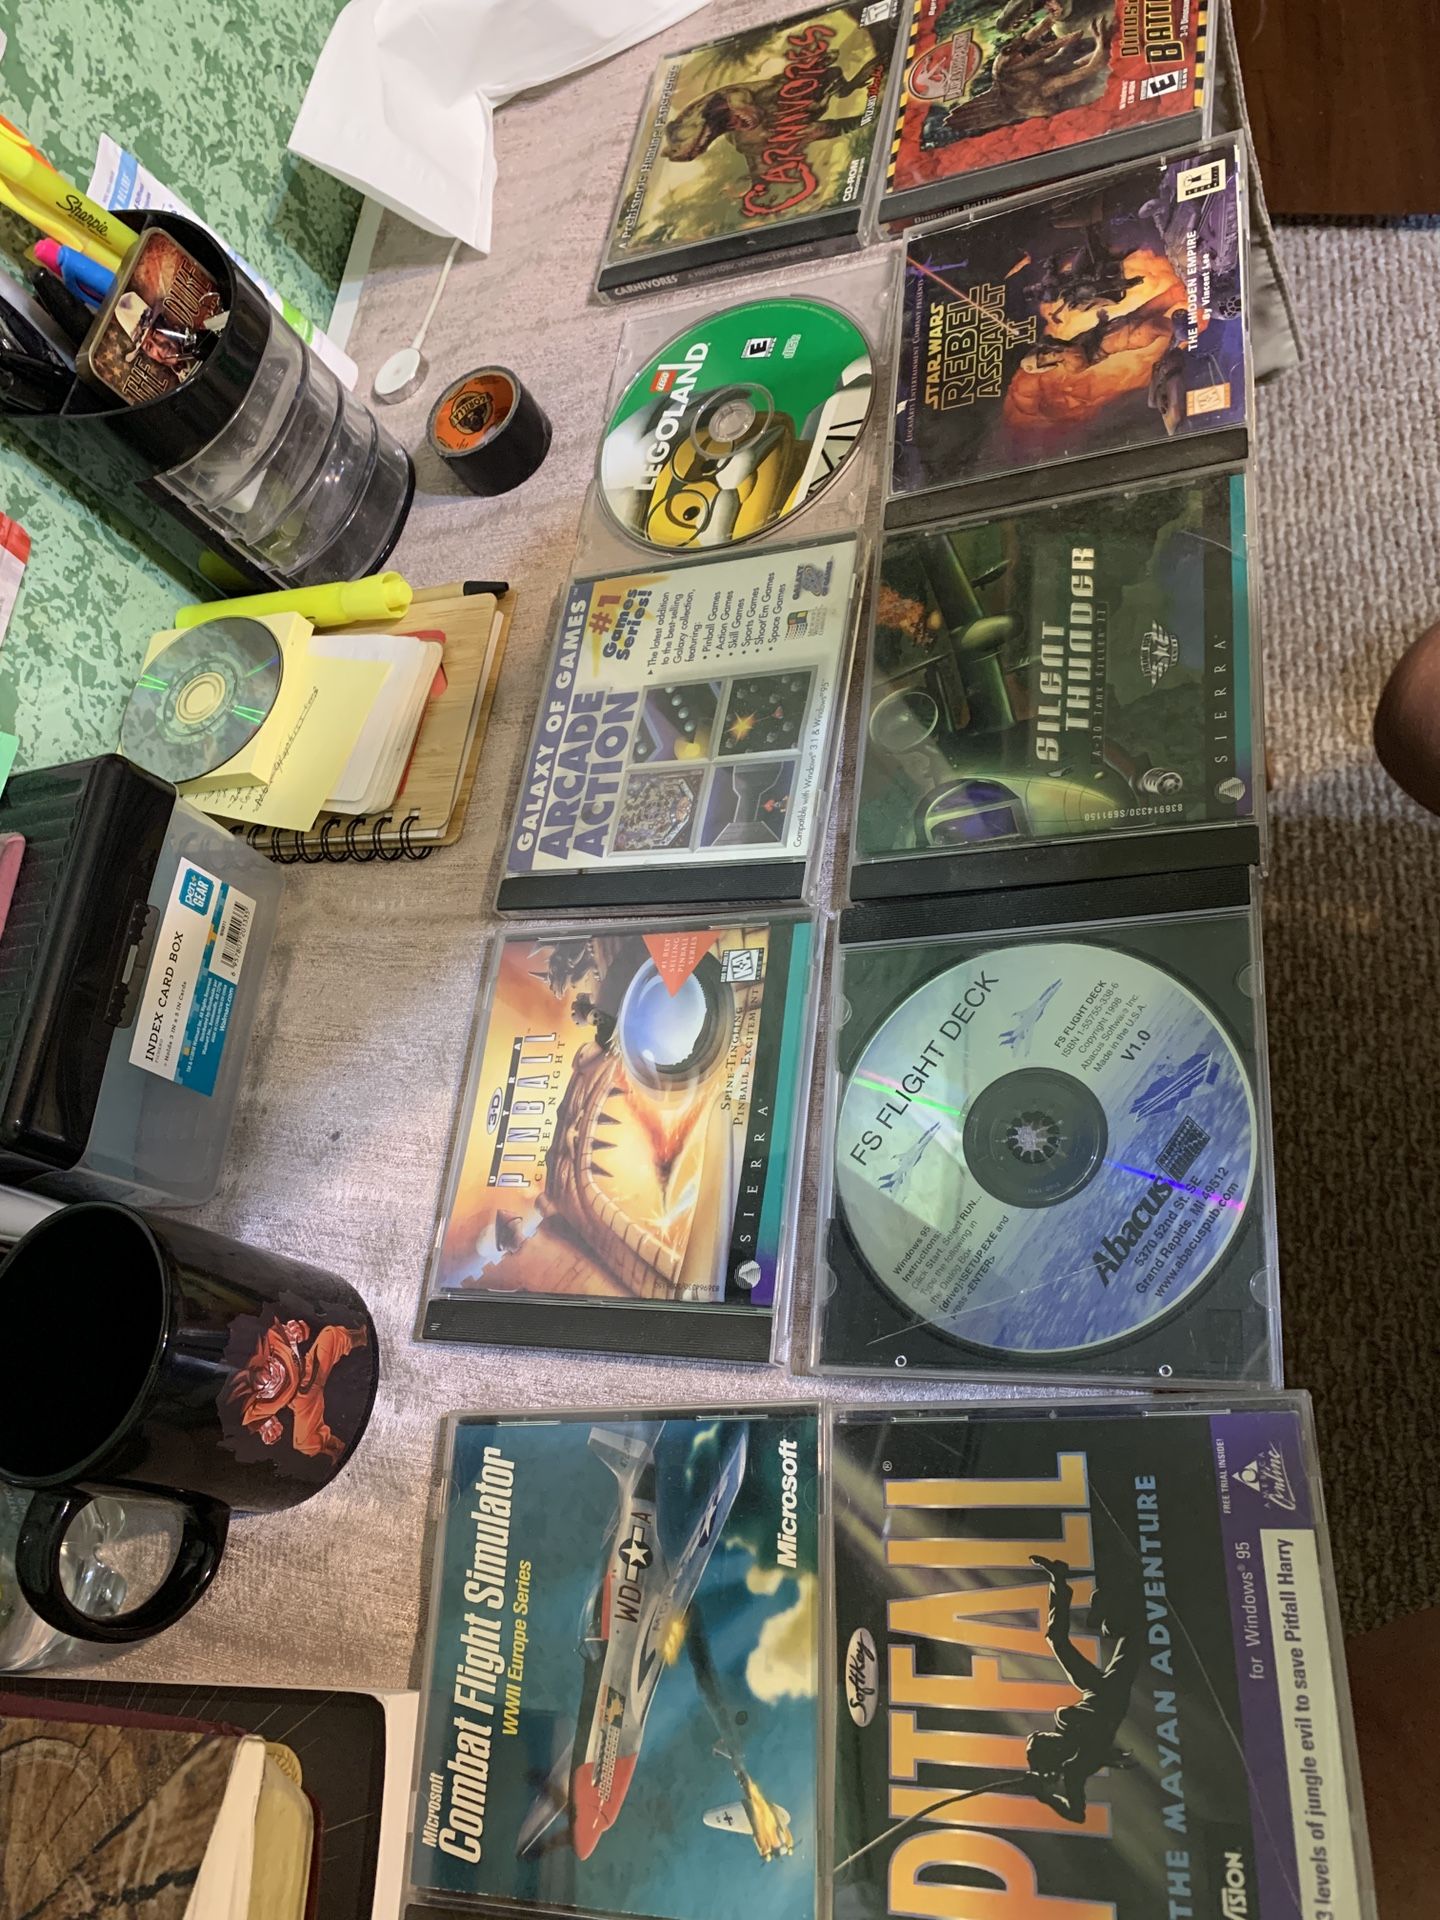 Old PC games